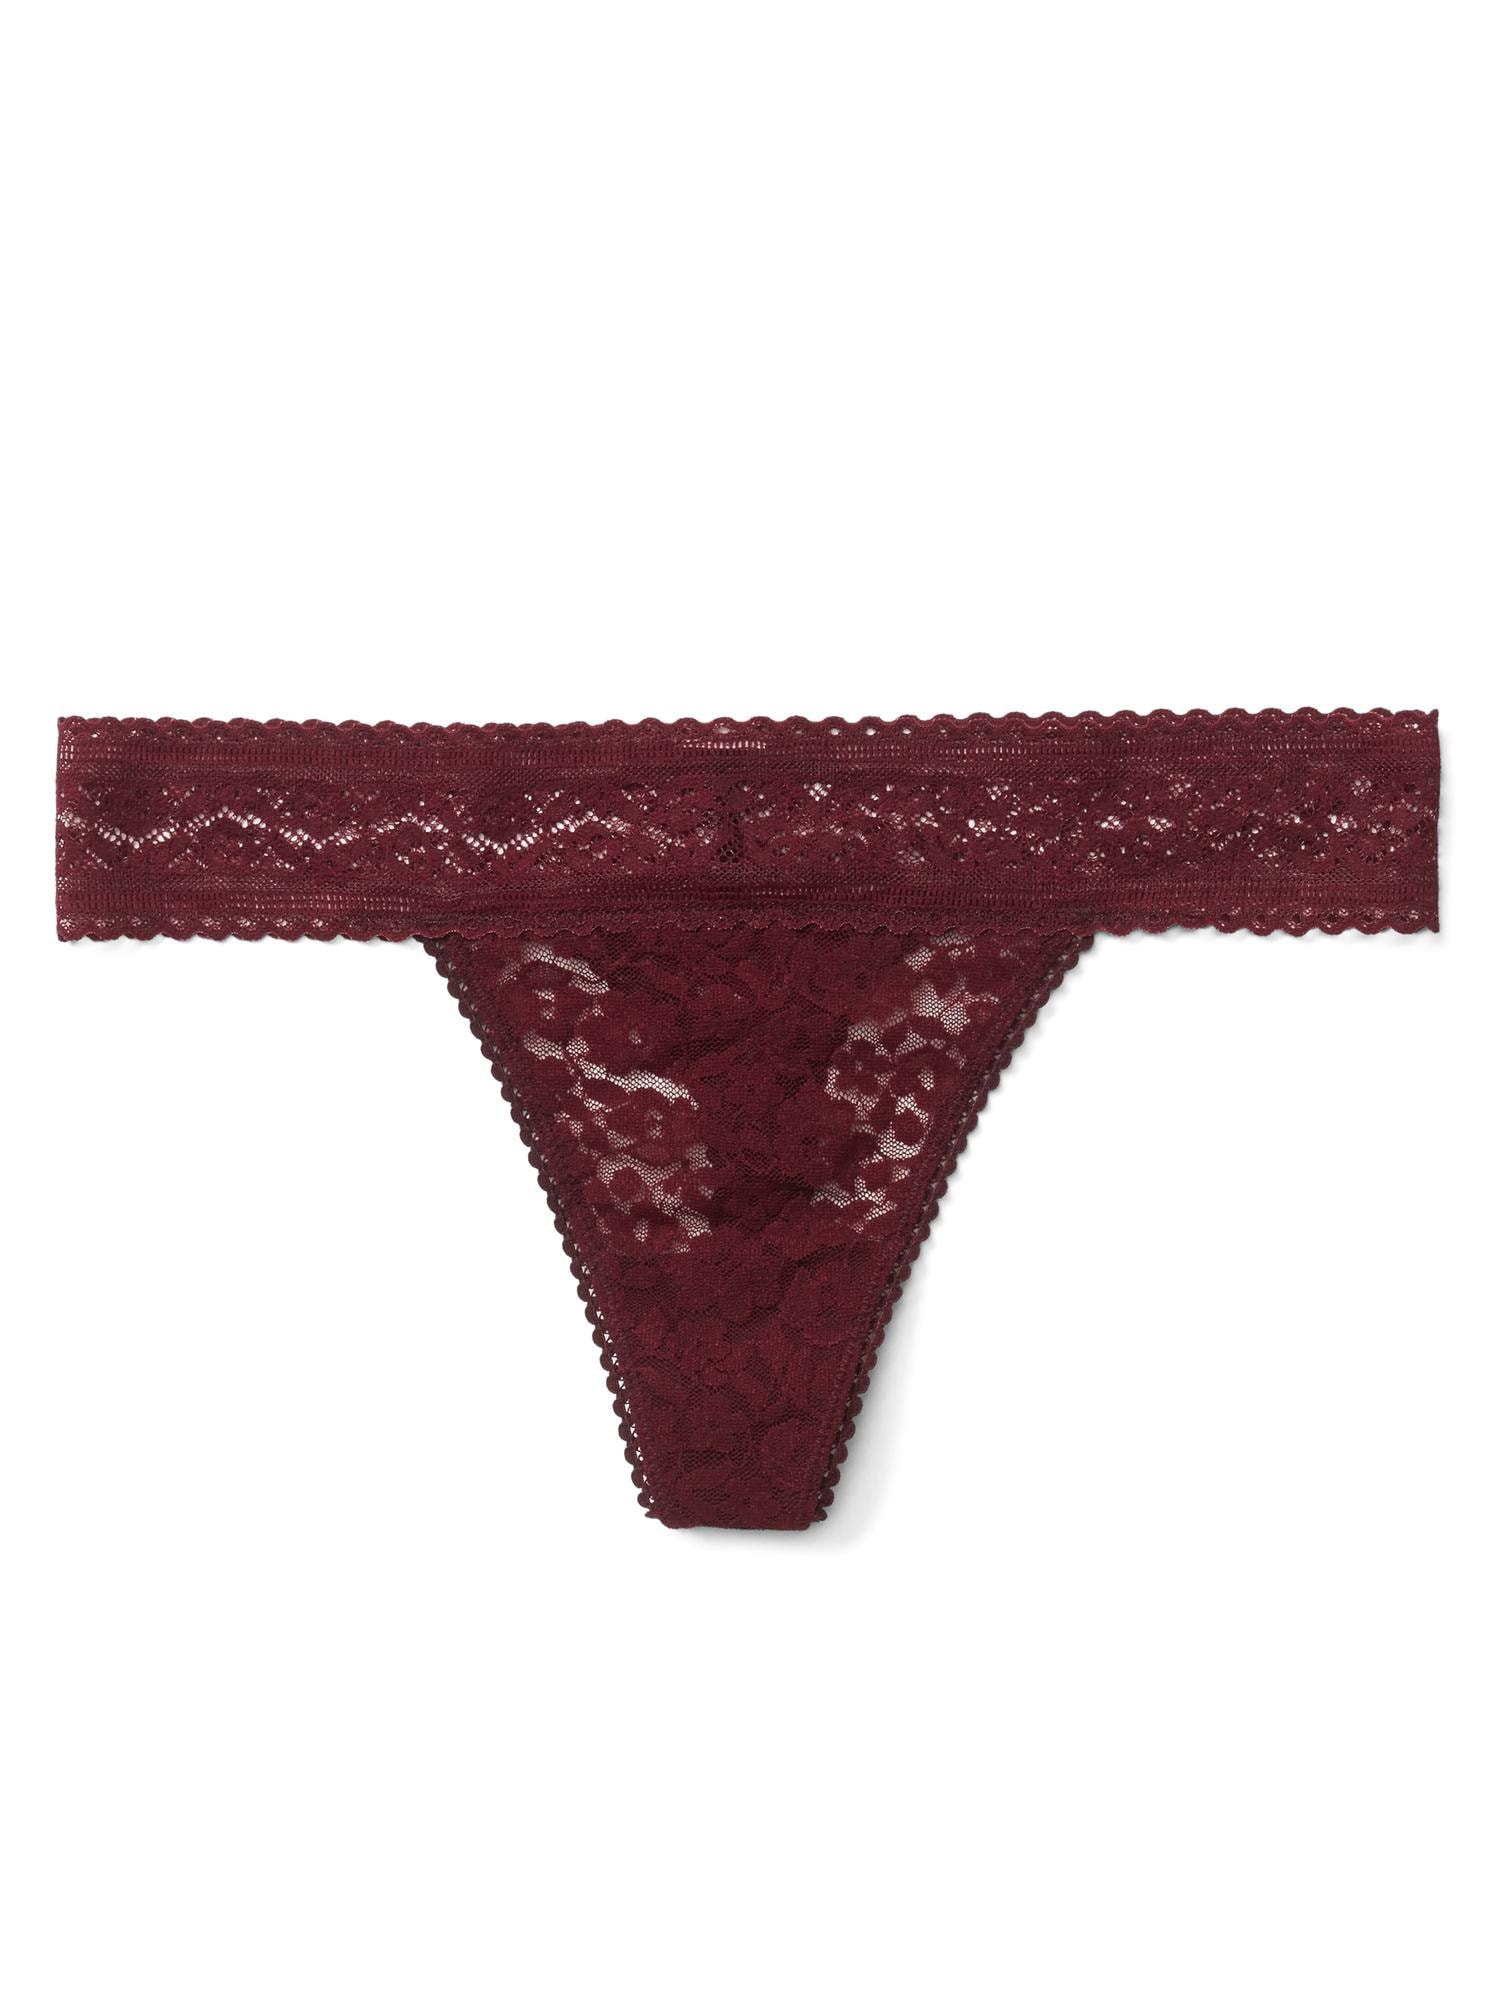 Lacy Thong · A Pair Of Panties · Knitting on Cut Out + Keep